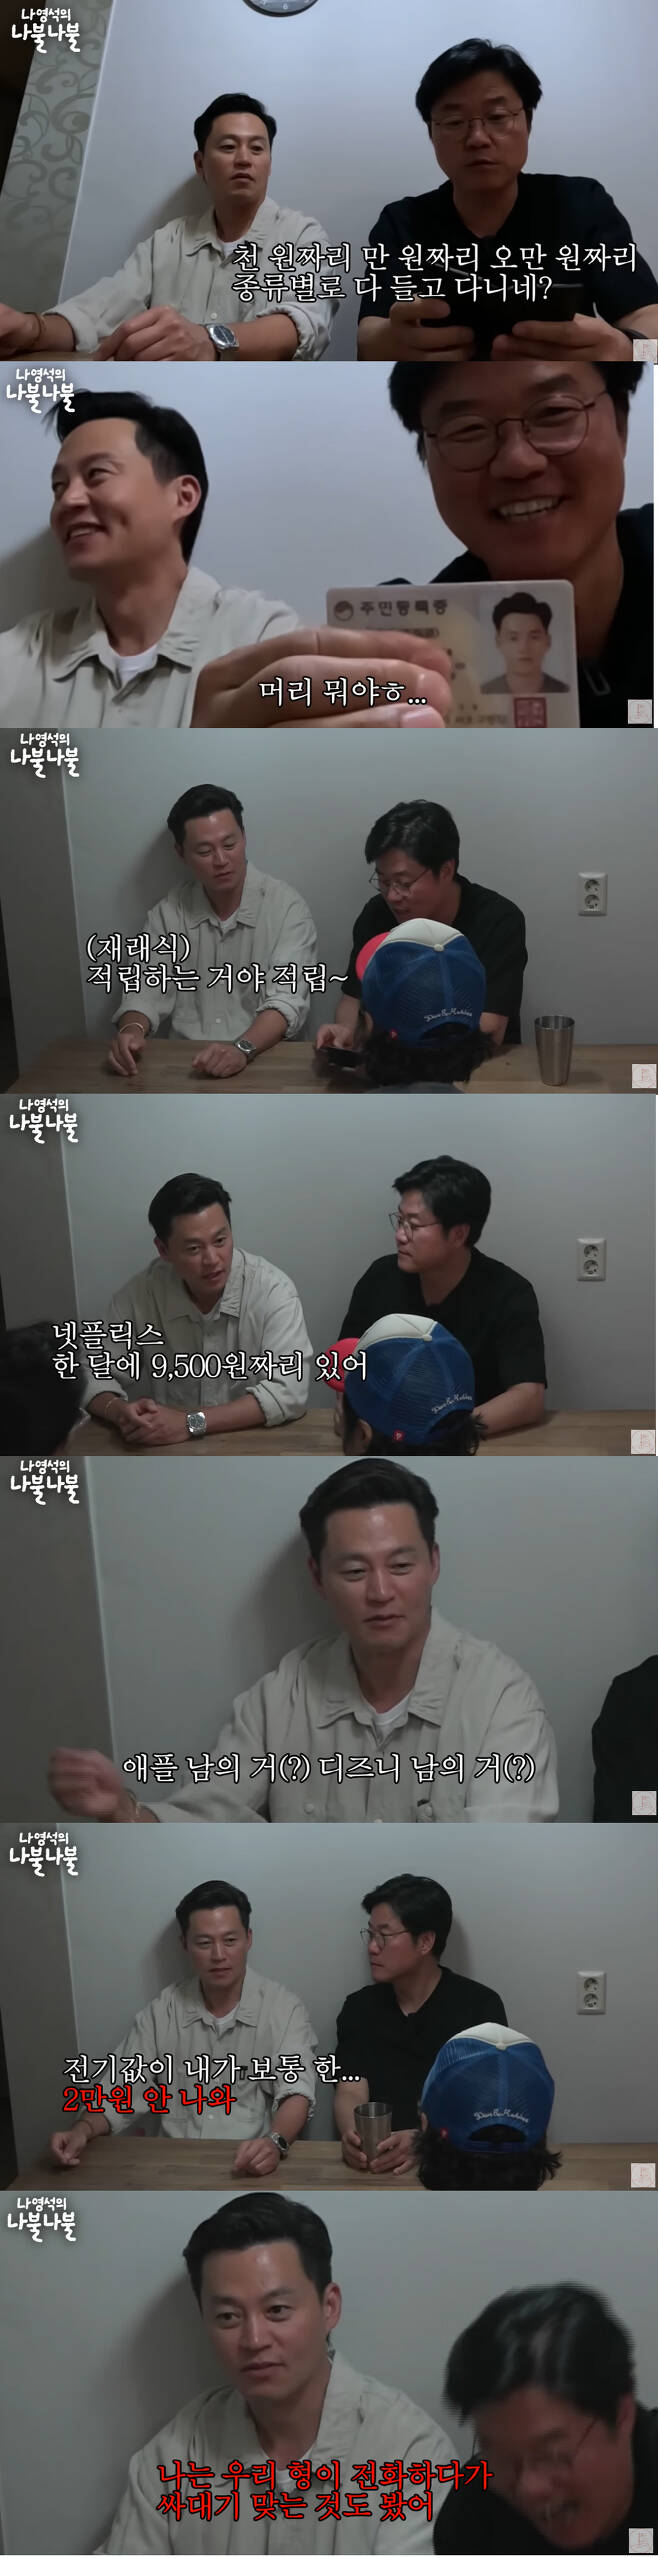 Actor Lee Seo-jin recalled his lifes best Danger and made his first mention of Love in the past.On the second day, Channel Fifteen, a video titled My brother and my first nabul was posted.Na Young-seok PD, along with Lee Seo-jin, released the first video of the chatter of the steamers who eat and drink as usual.I have a little bit of money in my wallet. Im more frugal than I thought, said Na PD, who opened Lee Seo-jins wallet. I usually take the bus subway.Lee Seo-jin said, I have a stand on at home. The electricity cost is only about 20,000 won per month. I think it is because I learned saving from my grandfather who was a bank president.He said, Even if I put 100 won and 40 won, I do not go back to 60 won. My father pulled out the phone when I called. I saw my brother who was on the phone hit his father.Na Young-seok said, My father died and my mother turned on the lights all over the room. Lee Seo-jin said, My mother is doing what she has always been repressed because her father died.My mother puts the boiler at 28 degrees Celsius. I set it at 21 degrees Celsius in winter. Its actually a bit cold. Everything in the house is similar. My uncle is no joke. My cousin is just like me. Especially when I eat out, its a mess if I leave food.When Na Young-seok suggested a new content, Why do not you go to Kwang-gyu-hyung and your brother and Everland and ride a ride? Lee Seo-jin smiled and said, How about Hong Kong Disneyland?The structure is compact, so if you take the kids, it is good to walk and turn a lot. When the story of Hong Kong came out, PD said, Now nobody remembers it. How long have you been in Hong Kong? Lee Seo-jin said, I have been there for about two months. I have no violence and I am clean.When I was in Korea, I thought I would not go to Korea. I spent more than two months using only my Hong Kong cell phone that my friend gave me. At that time, I learned golf and went to Disneyland.I had a DVD player at Hong Kong Health Club, so I started watching the 24 Hours of Midnight for the first time while doing aerobic exercise. I worked out for three hours to watch it, and I lost up to 66 kilograms. I lost weight and got better, he said.Lee Seo-jins thing did not mention it directly, but it seemed to be the time when he broke up with actor Kim Jung-Eun at the time and talked about all the controversies in Korea and was alone in Hong Kong.Lee Seo-jin said, That was the best Danger of my life, he said. I was ready to emigrate anytime after that Danger.Regarding Love and marriage, Lee Seo-jin stated negatively: I think I did Love until Hong Kong, then it was a shock, there was nothing as big as that, and added, Right now, the dating routine itself is so annoying.I ate outside, drank coffee, watched a movie, and after Hong Kong, I was shocked by the shock. Even as an actor, he said it was harder when he was in an awkward position.Lee Seo-jin said, When I was a rookie, I was very motivated, but it was the most stressful when I was in a bad mood. What do you want to say to Lee Seo-jin in his 20s? Its strange.Even if youre in your 20s, it doesnt last long. I think the real thing is that you have to live well from the 60s.